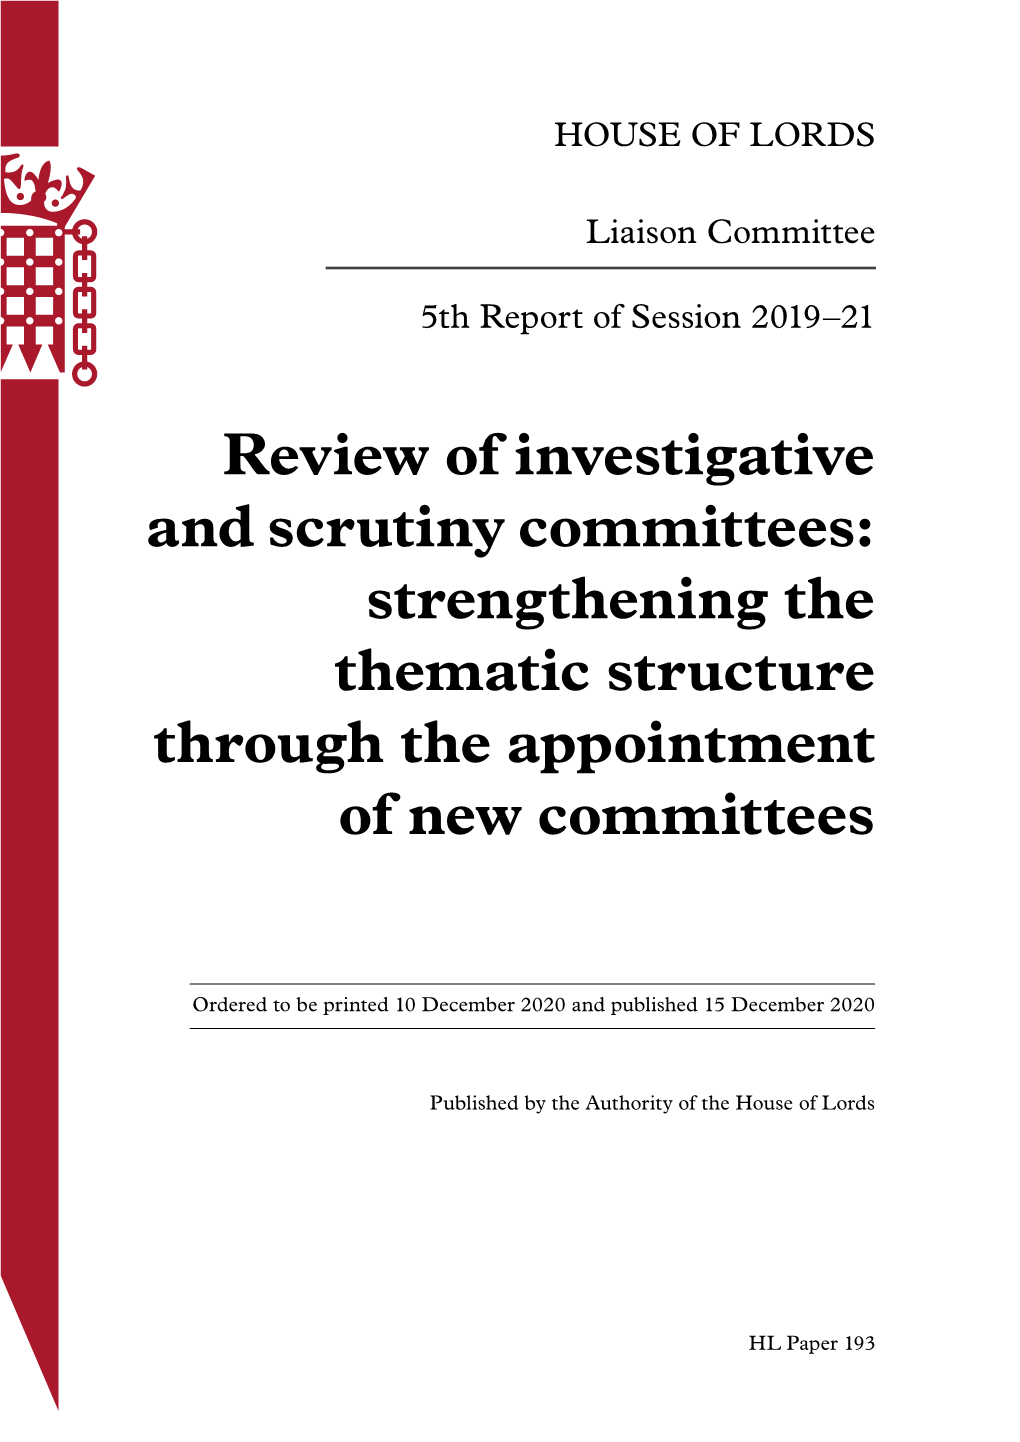 Review of Investigative and Scrutiny Committees: Strengthening the Thematic Structure Through the Appointment of New Committees